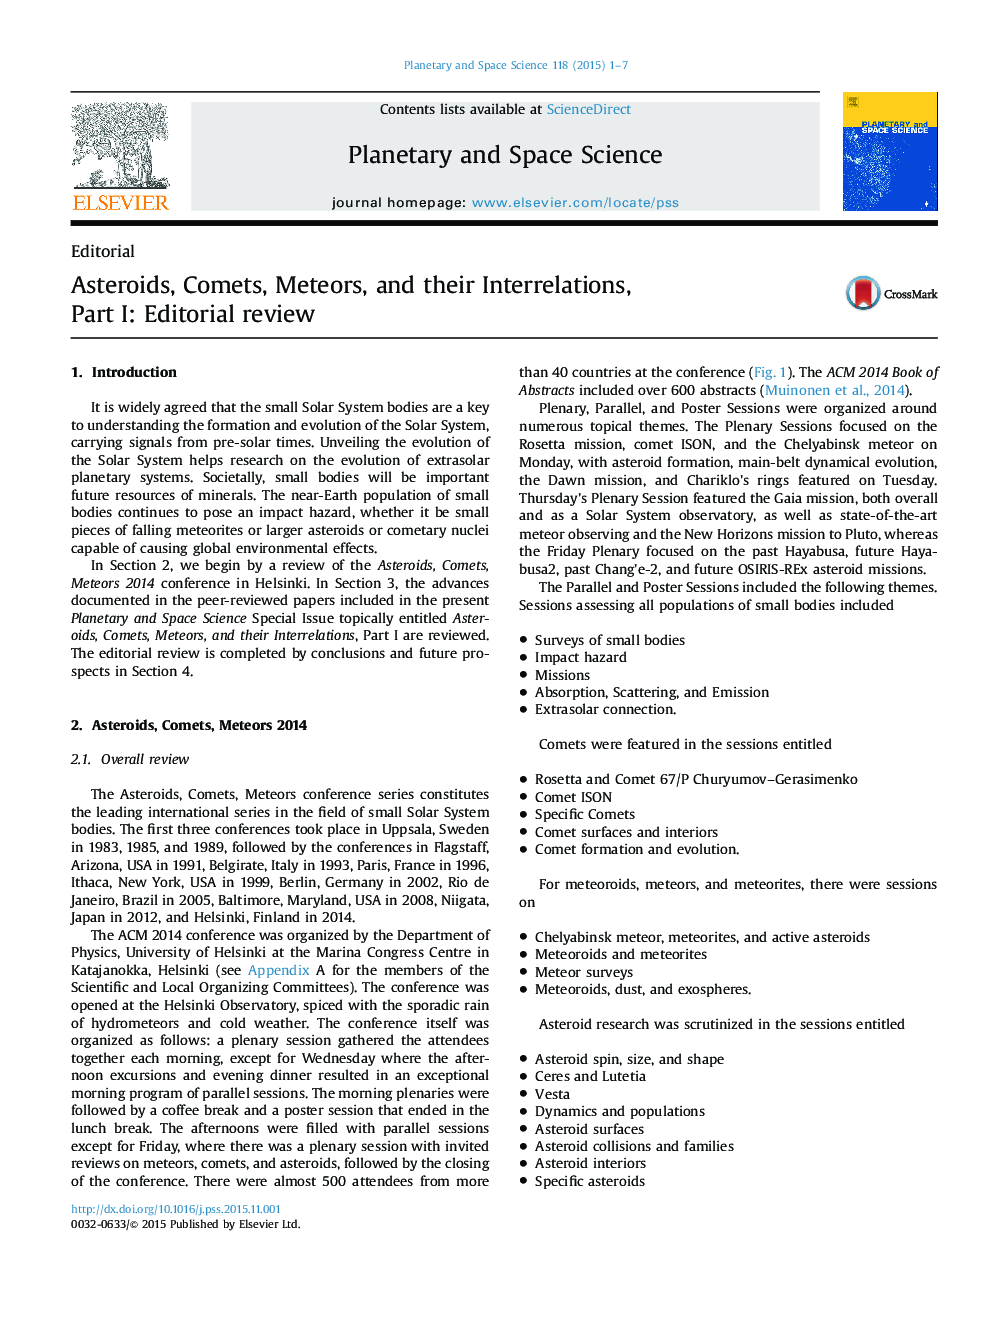 Asteroids, Comets, Meteors, and their Interrelations, Part I: Editorial review